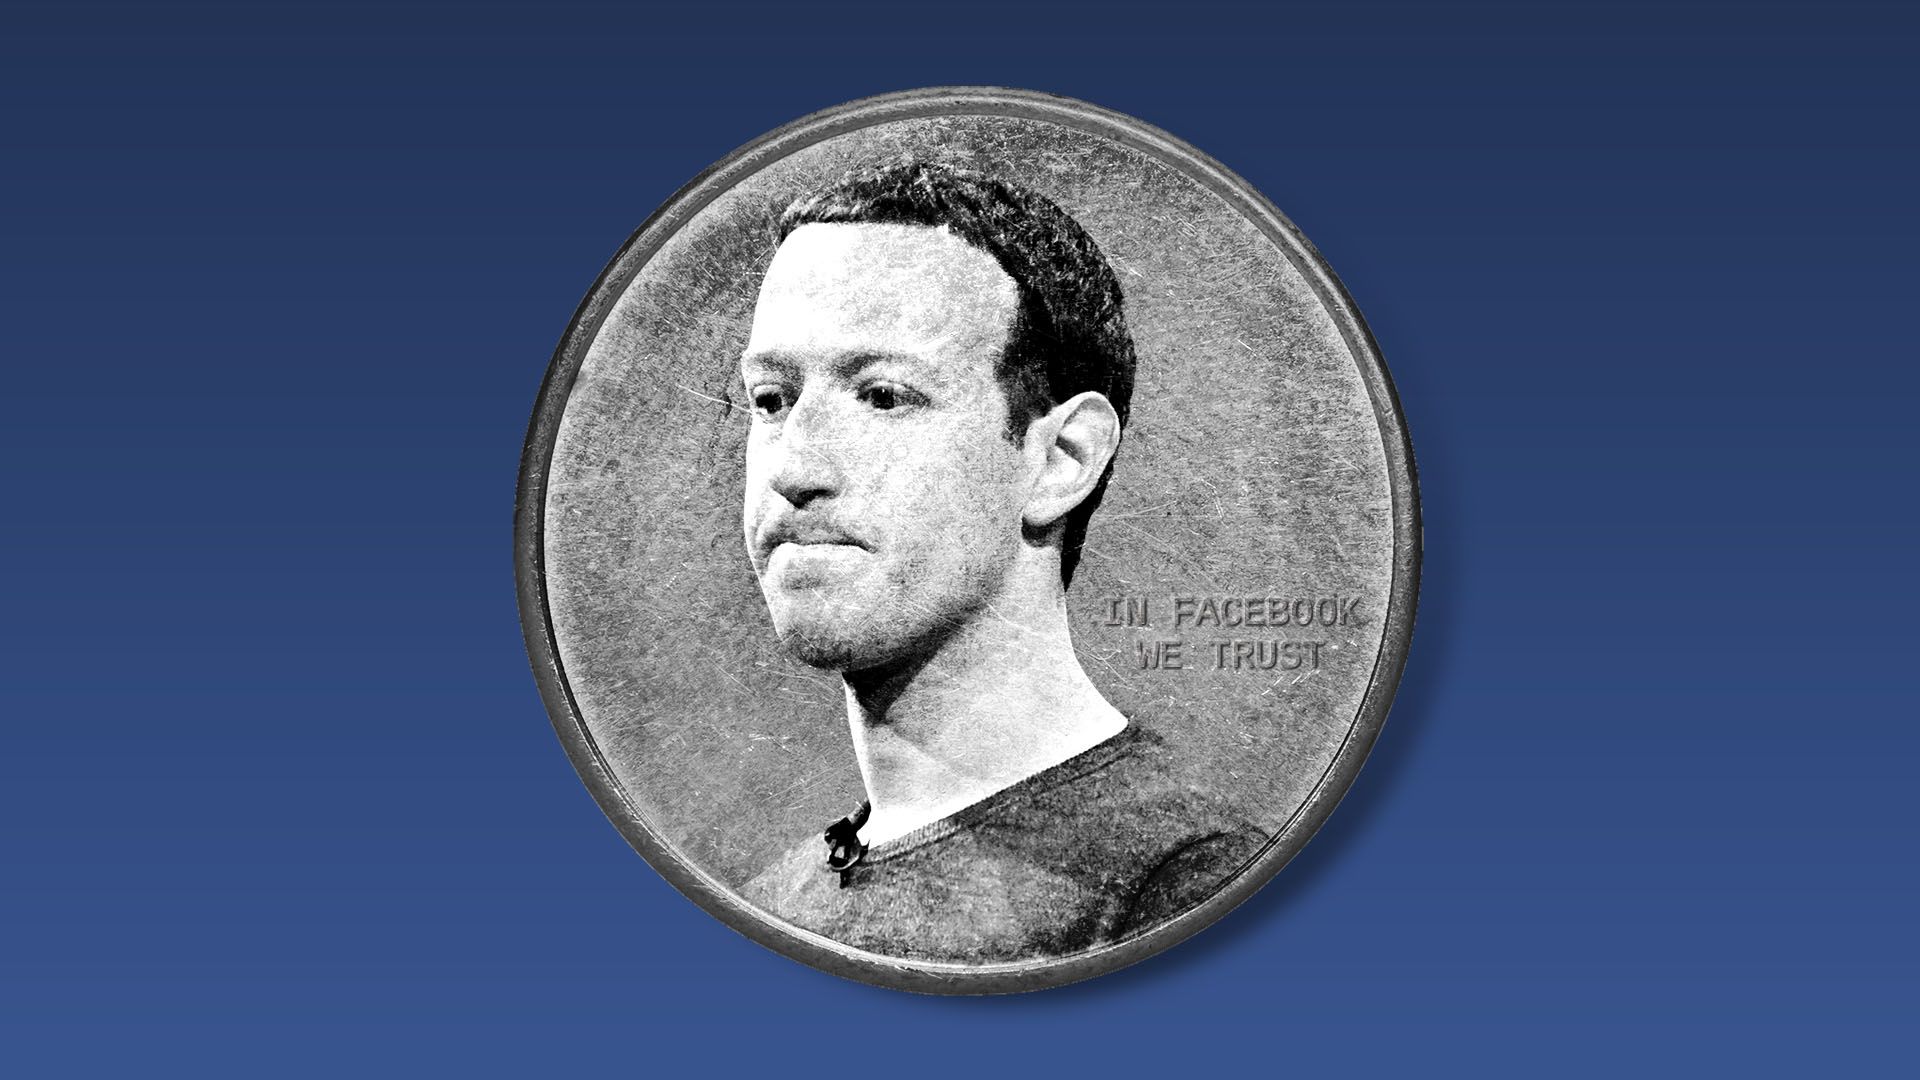 Illustration of a coin with Mark Zuckerberg's face on it